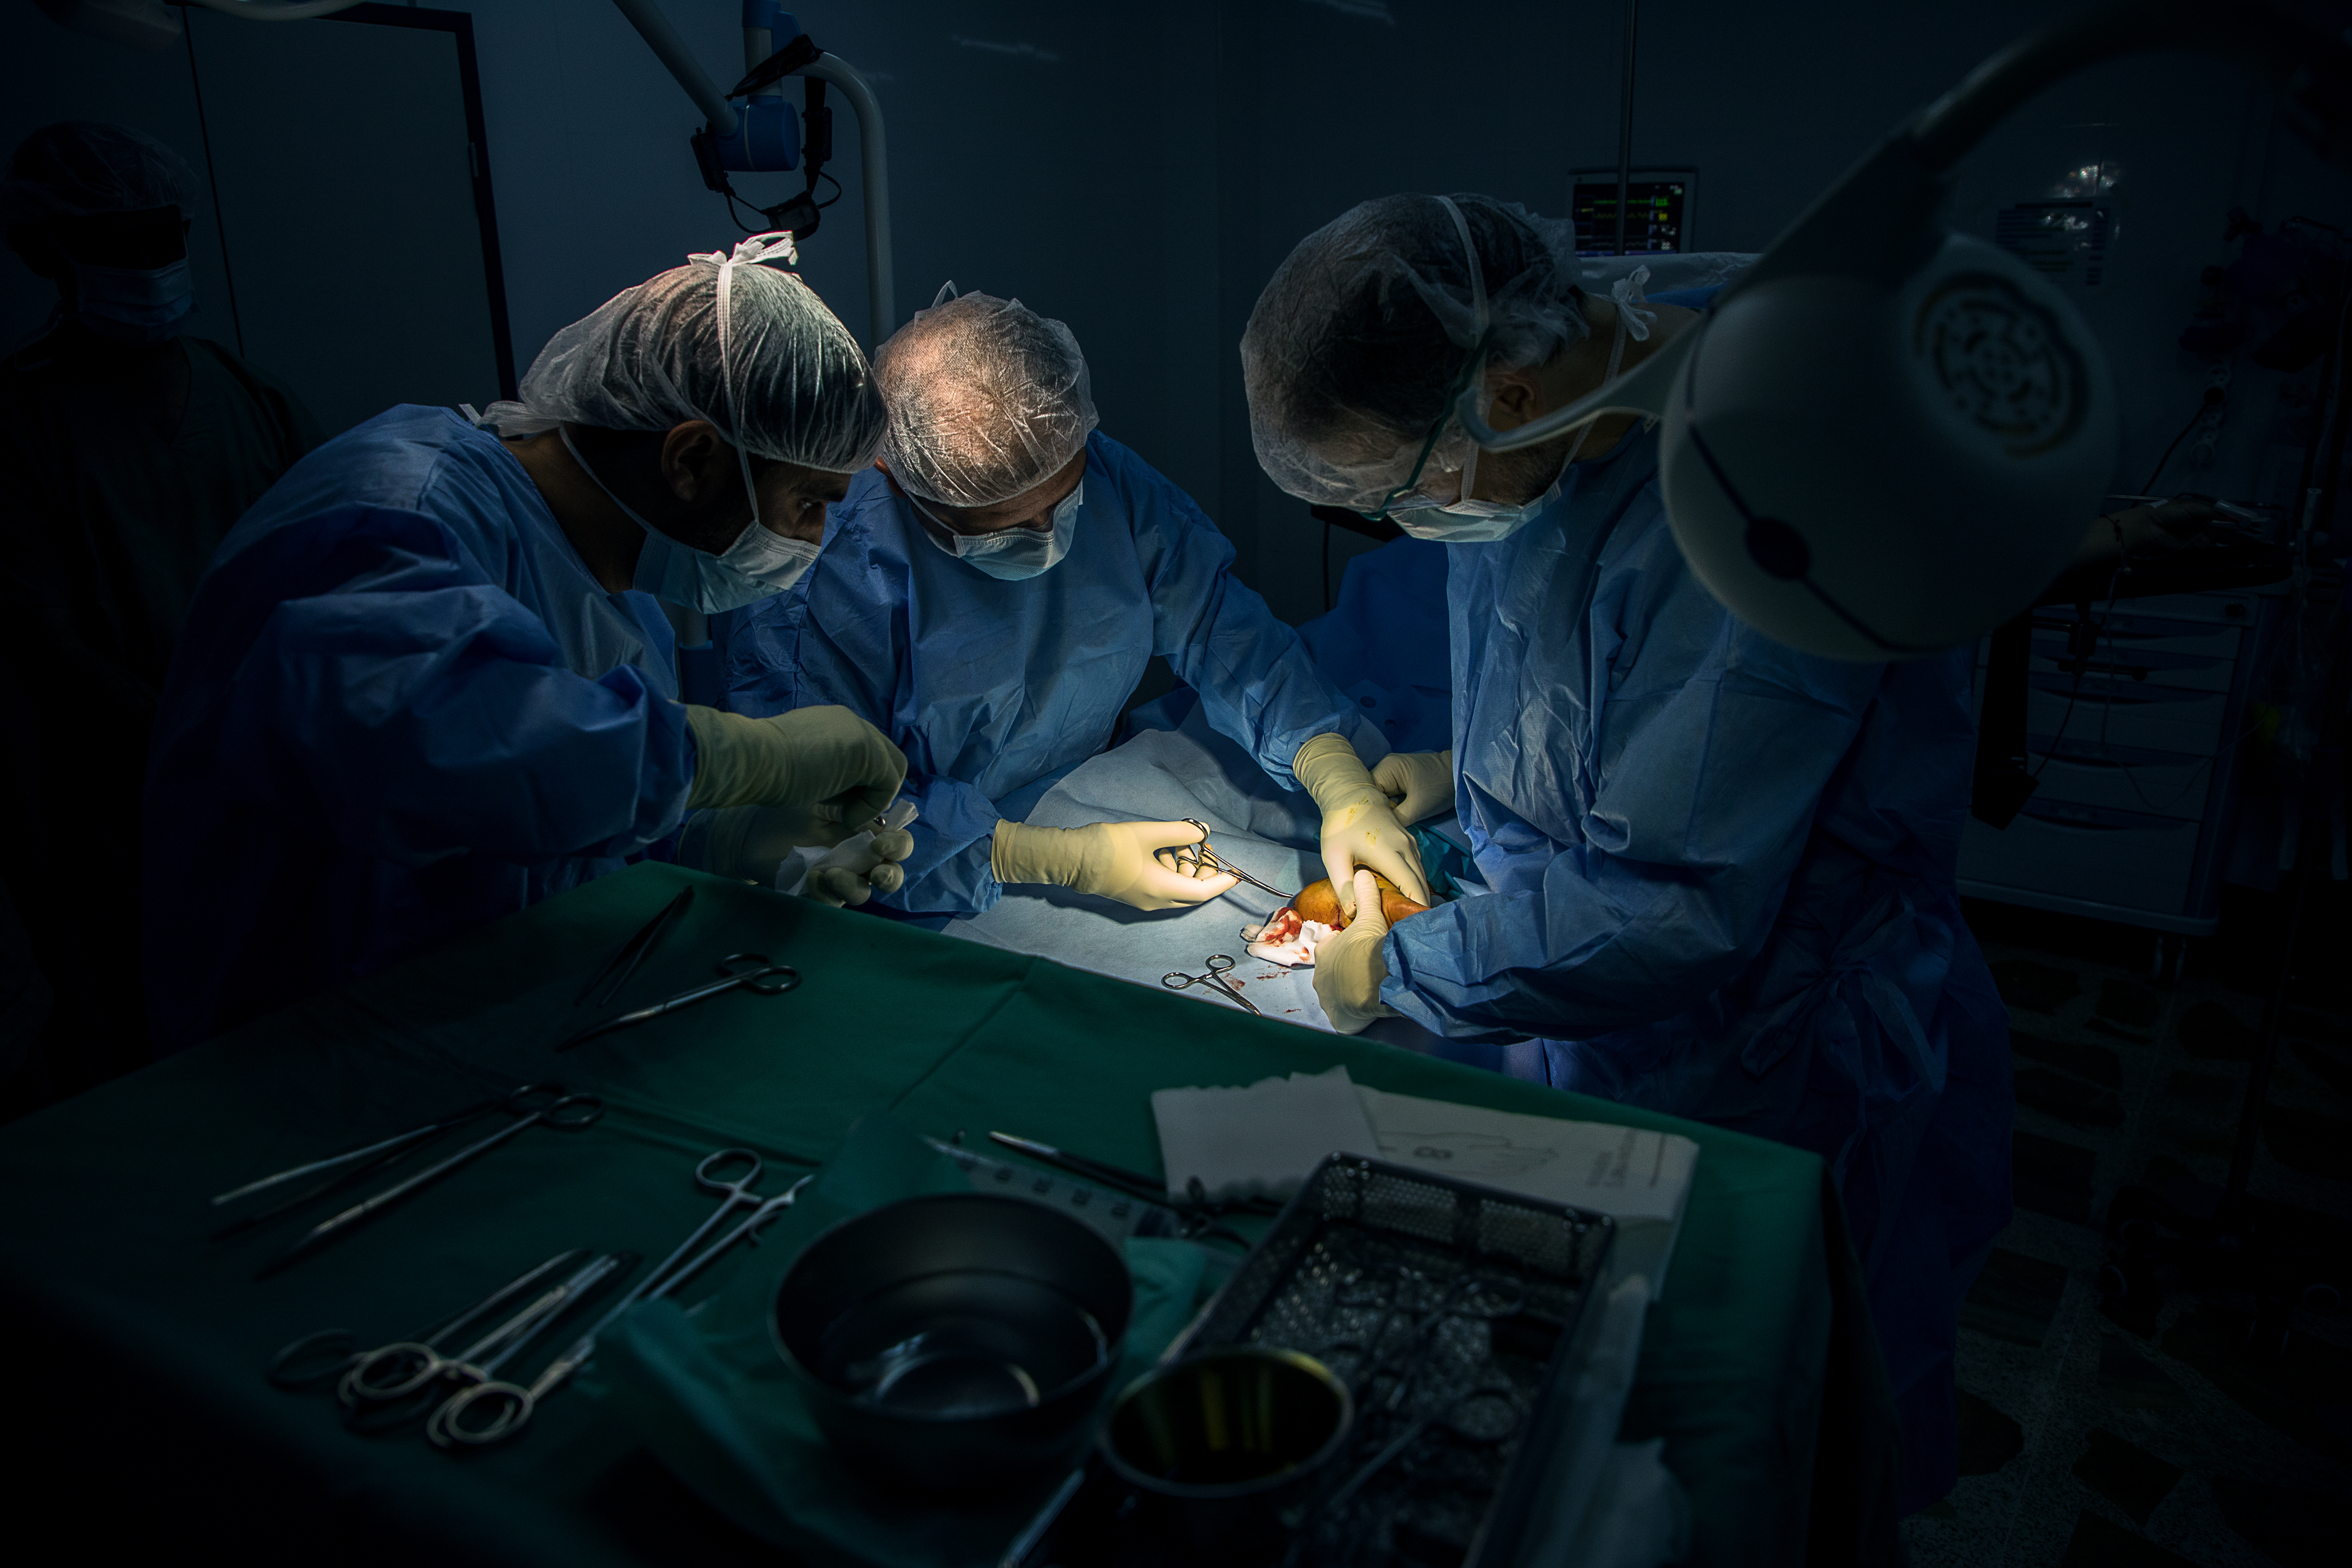 © Hussein Amri/MSF  A woman receives surgery to remove a piece of shrapnel from her heel in an injury she sustained weeks earlier in Mosul, northern Iraq. 